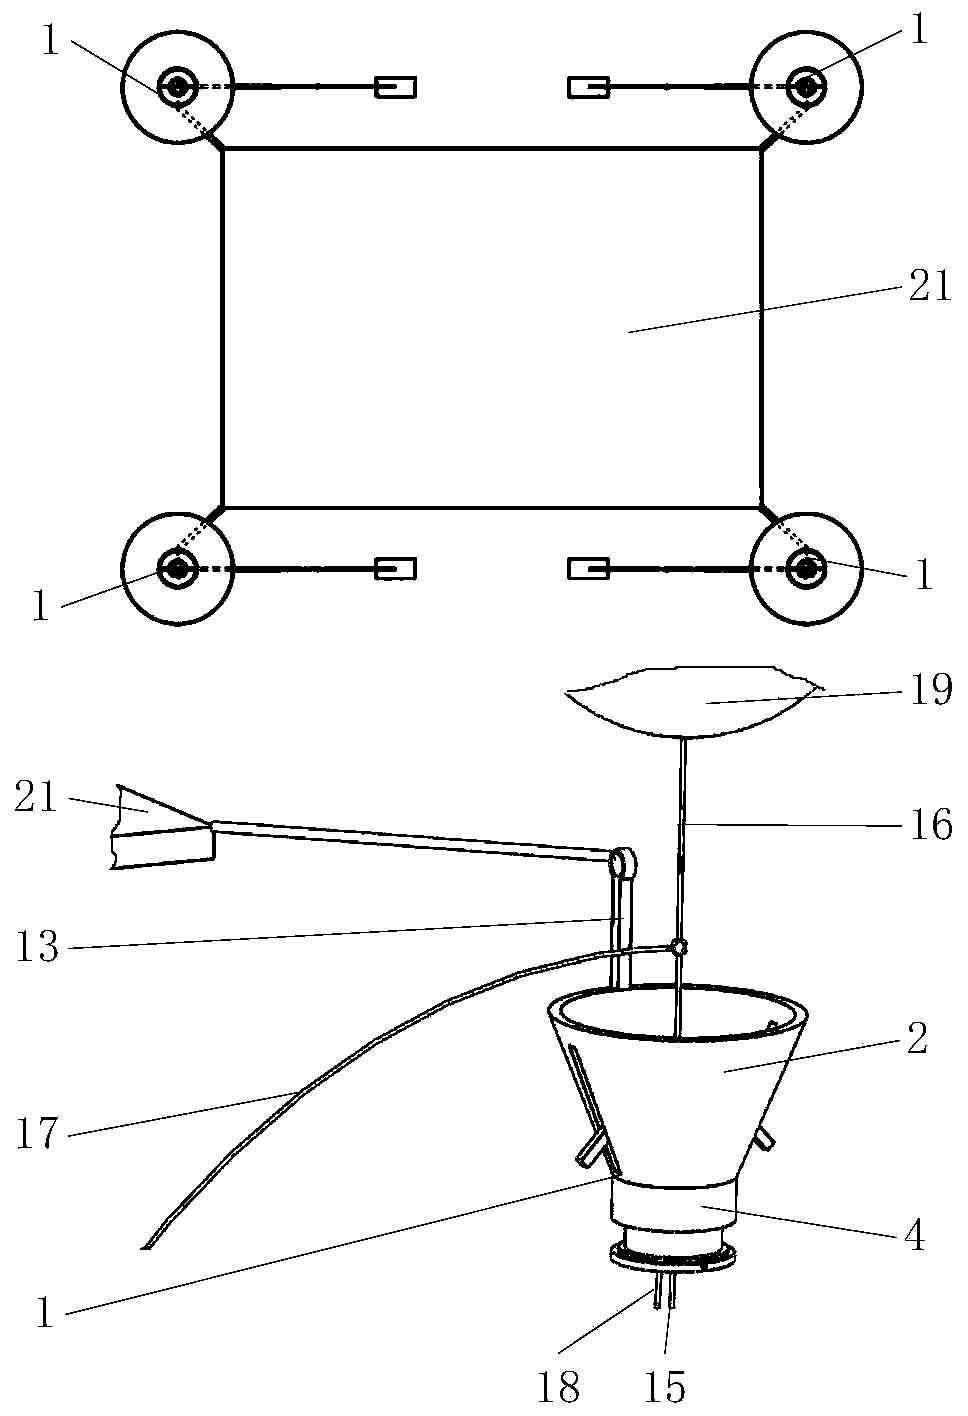 Device for increasing garden transplanted nursery stock survival rate